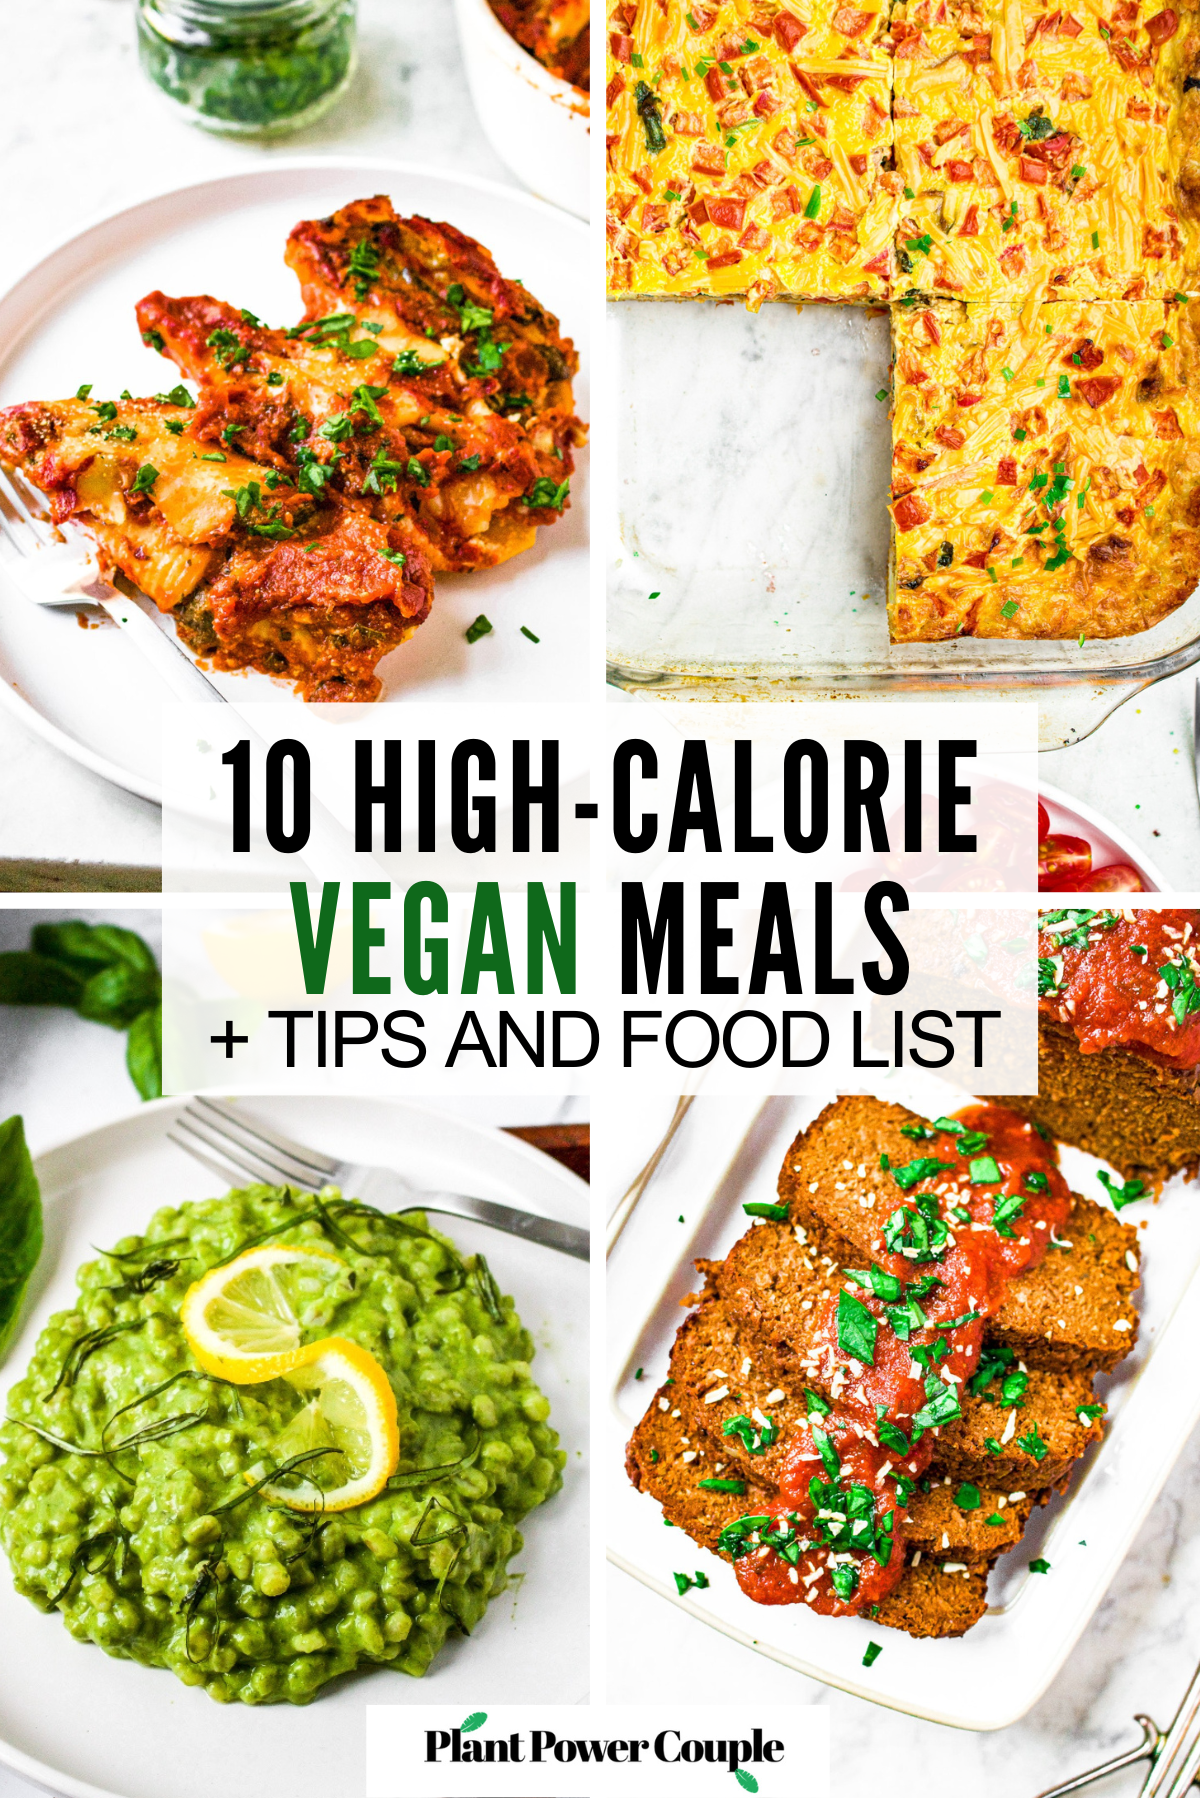 A grid with four photos: stuffed shells, breakfast casserole, avocado risotto, and vegan meatloaf. Text reads: 10 high-calorie vegan meals + tips and food list